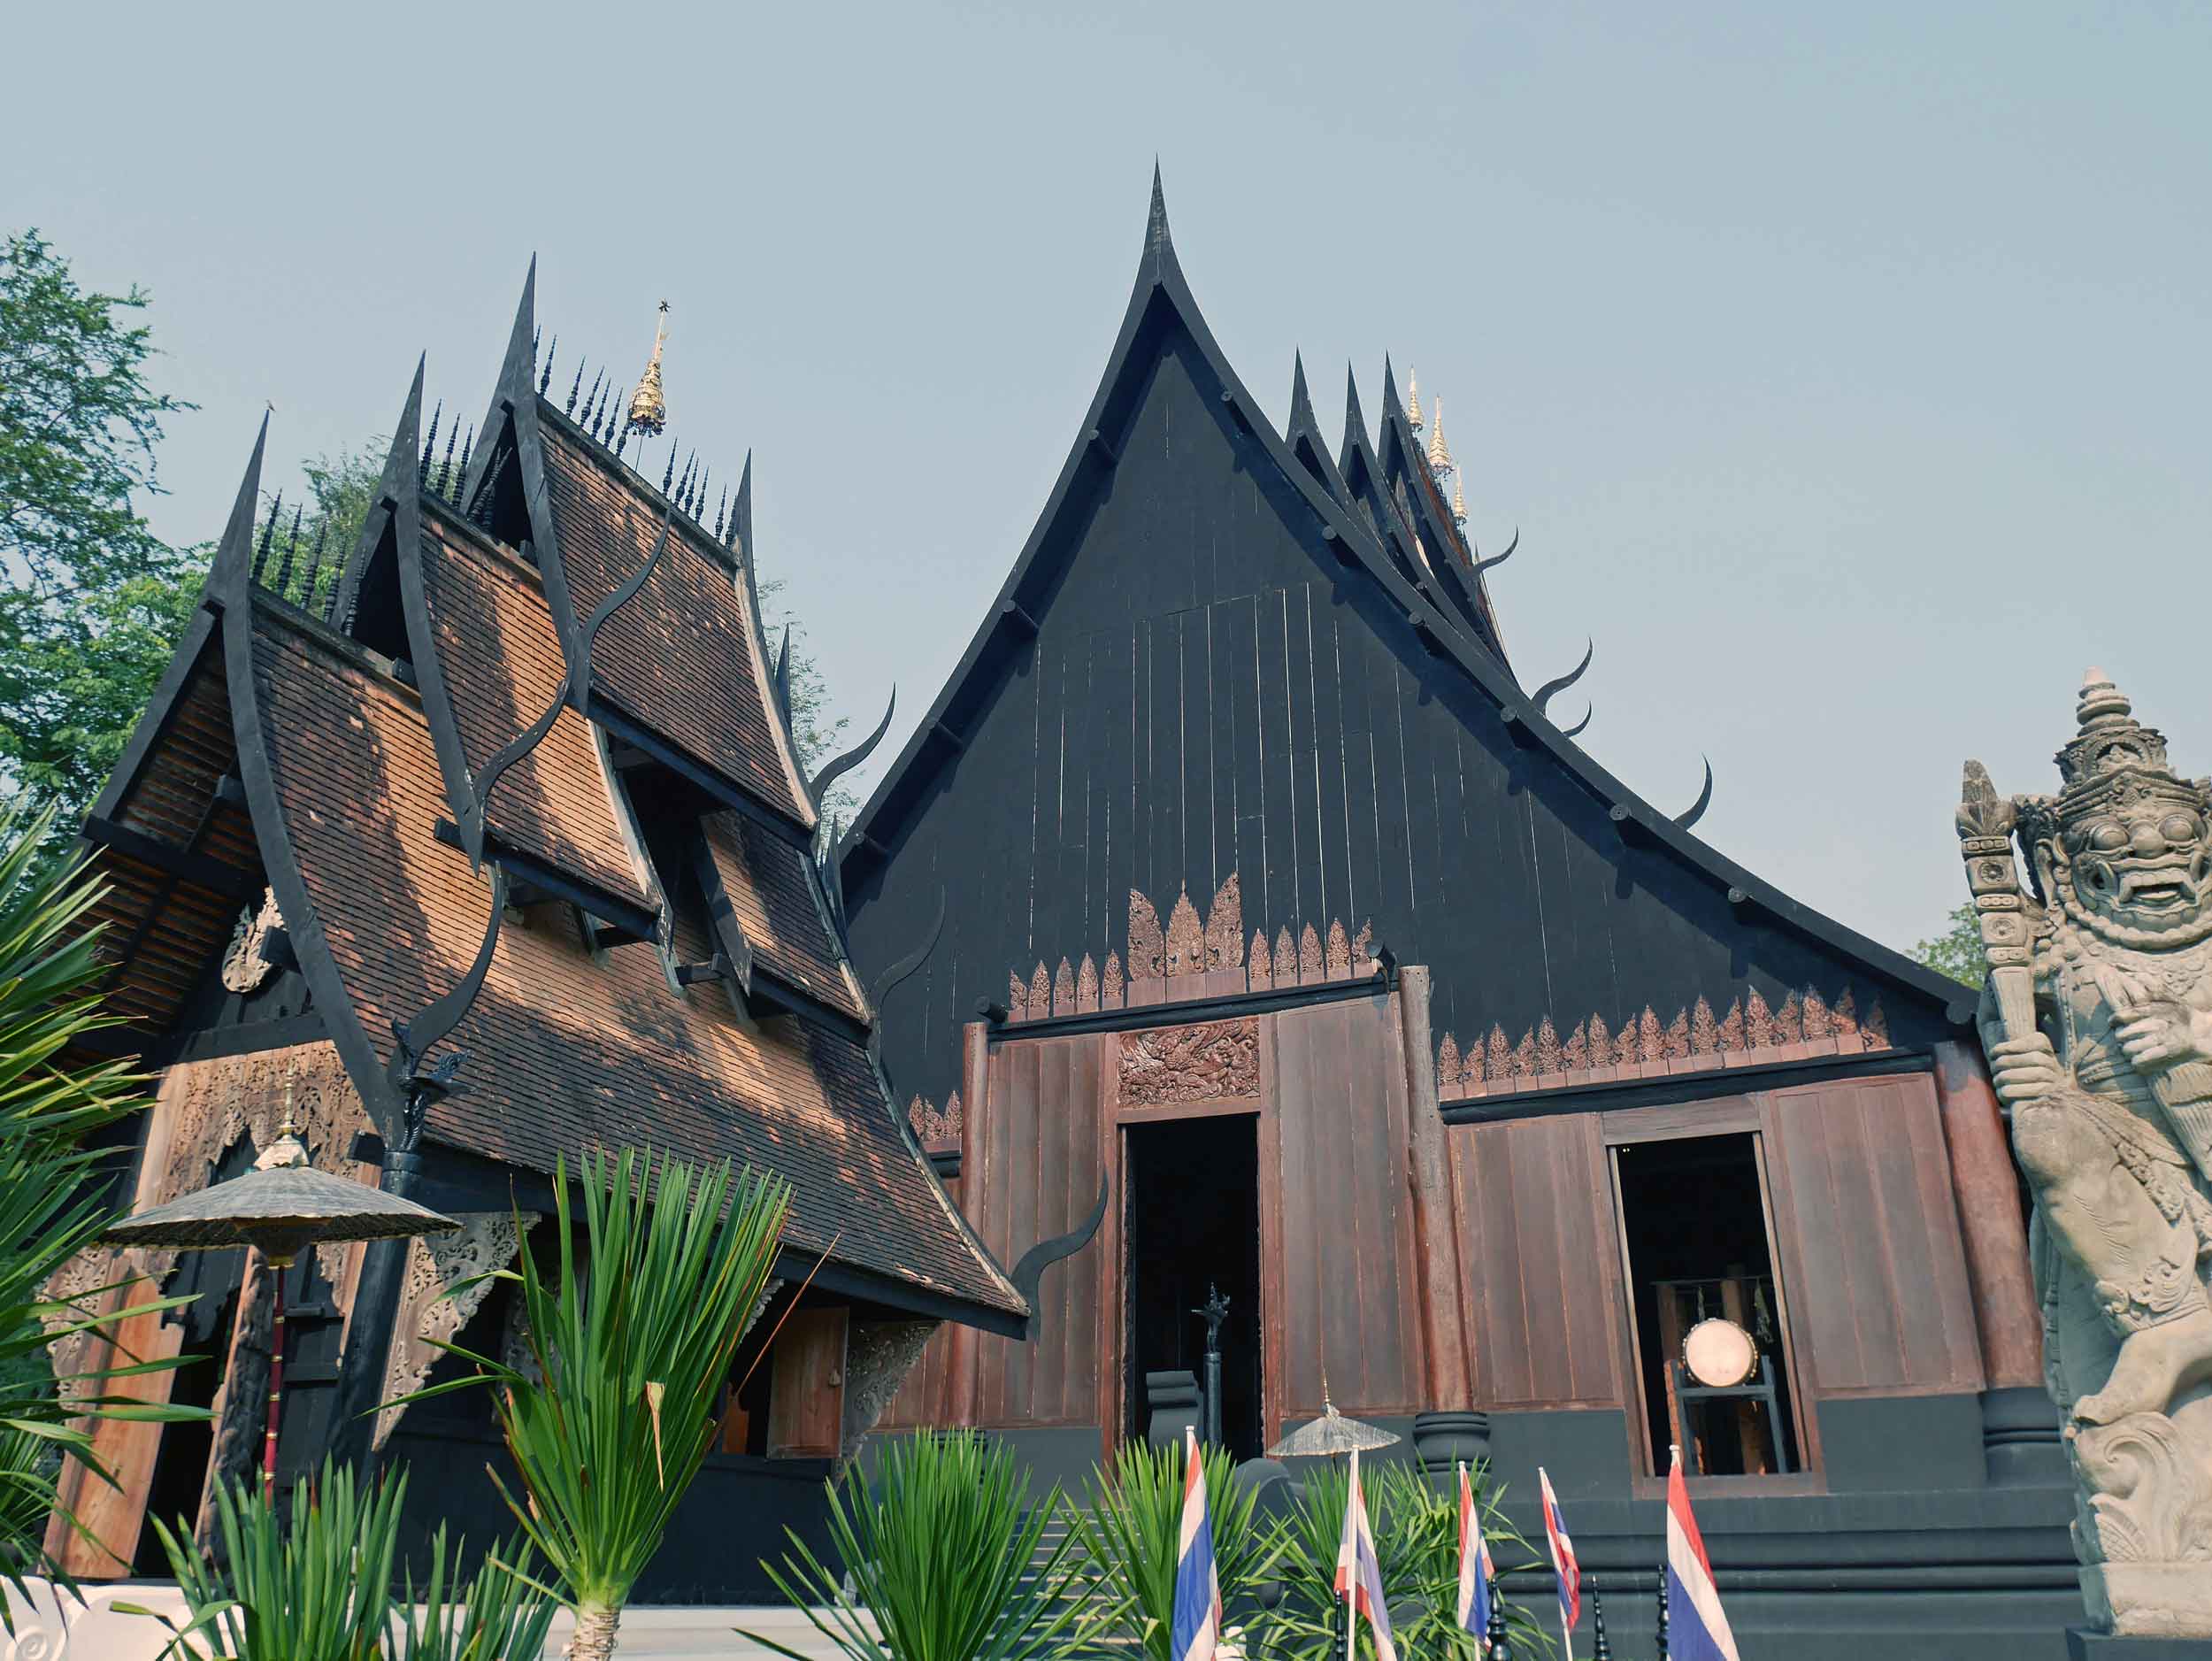  Entrance and main display building at Black House, or Baan Dam Museum, featuring the works of Thai national artist, Thawan Duchanee. 